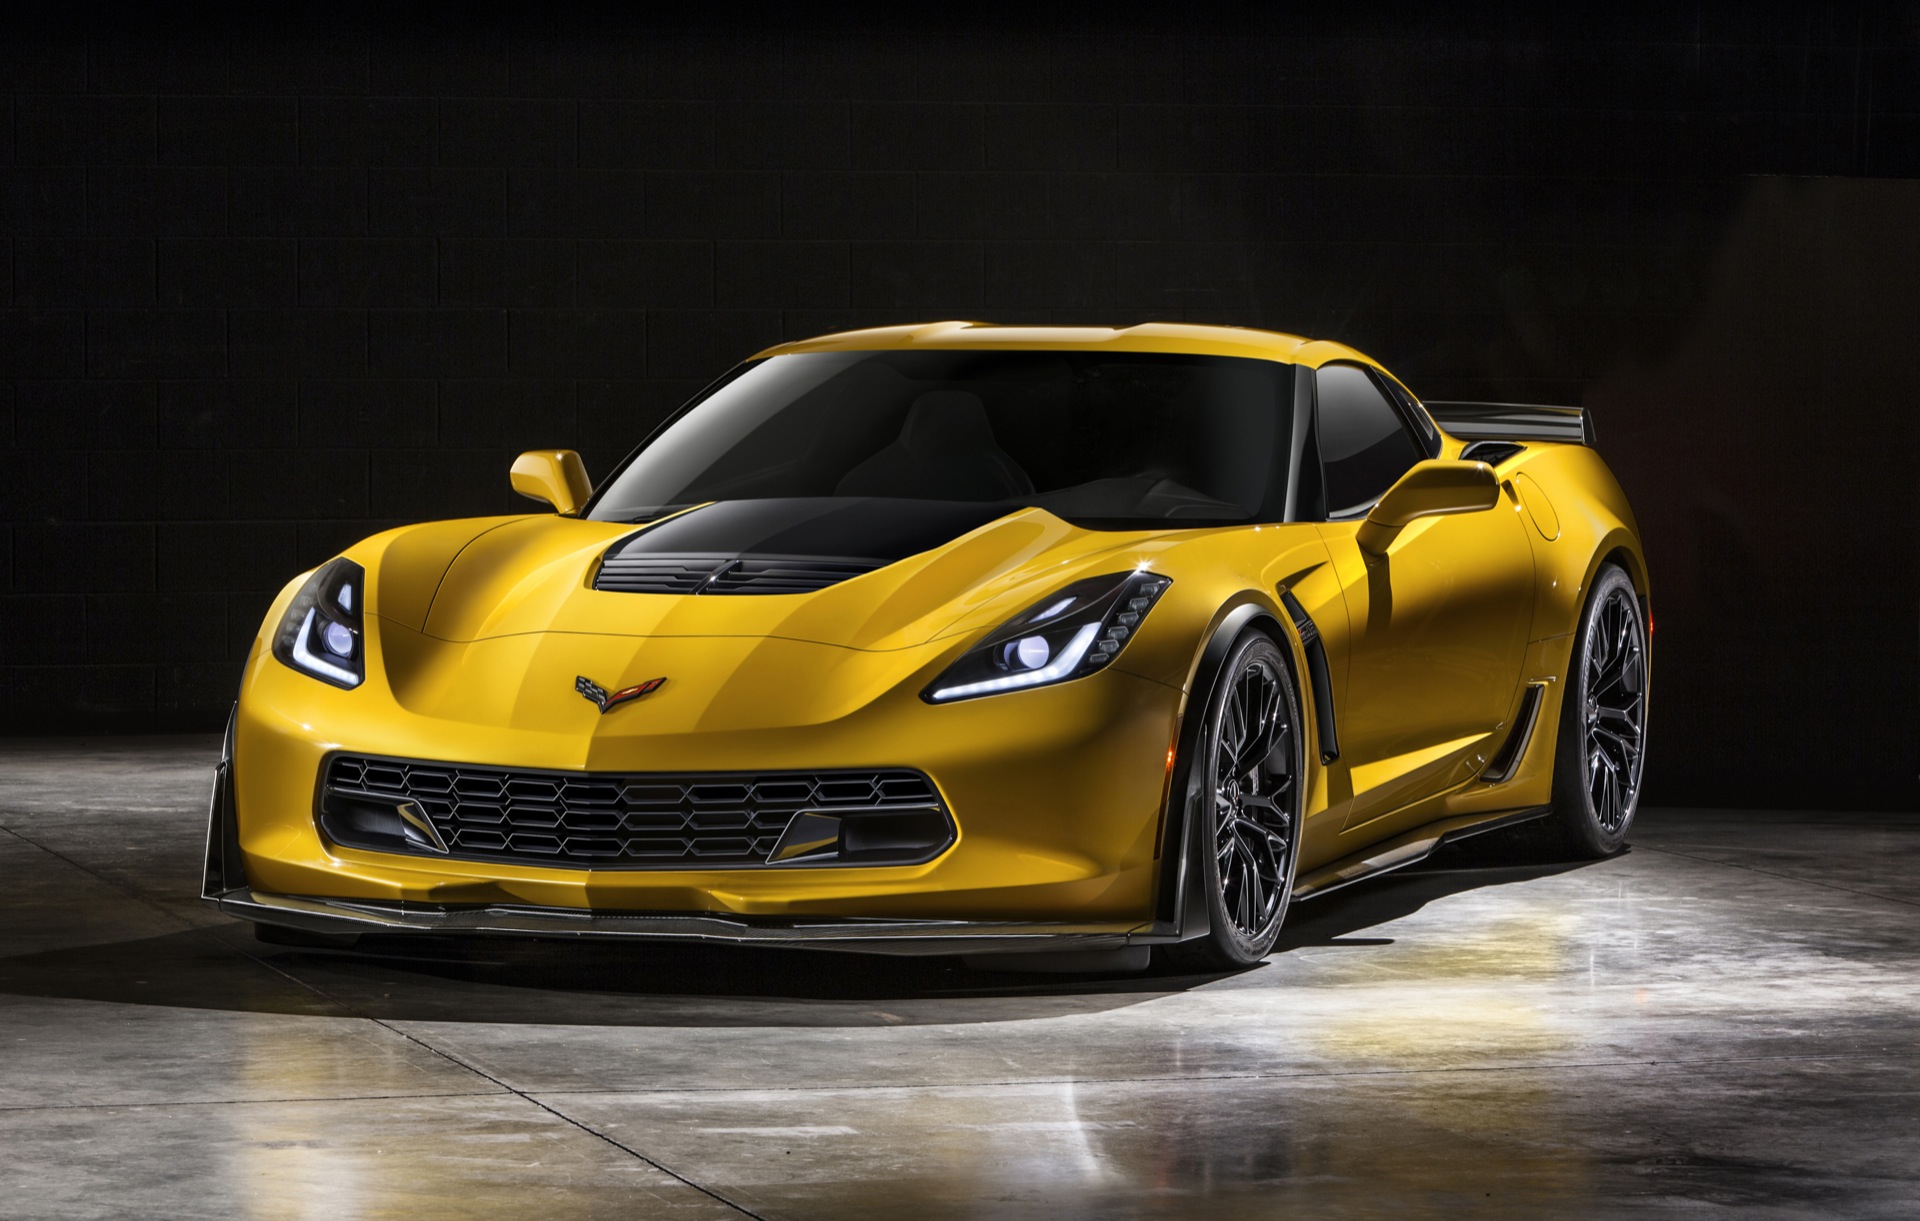 2015 Chevy Corvette Z06 650 hp, 650 lbft, Most Powerful GM Ever